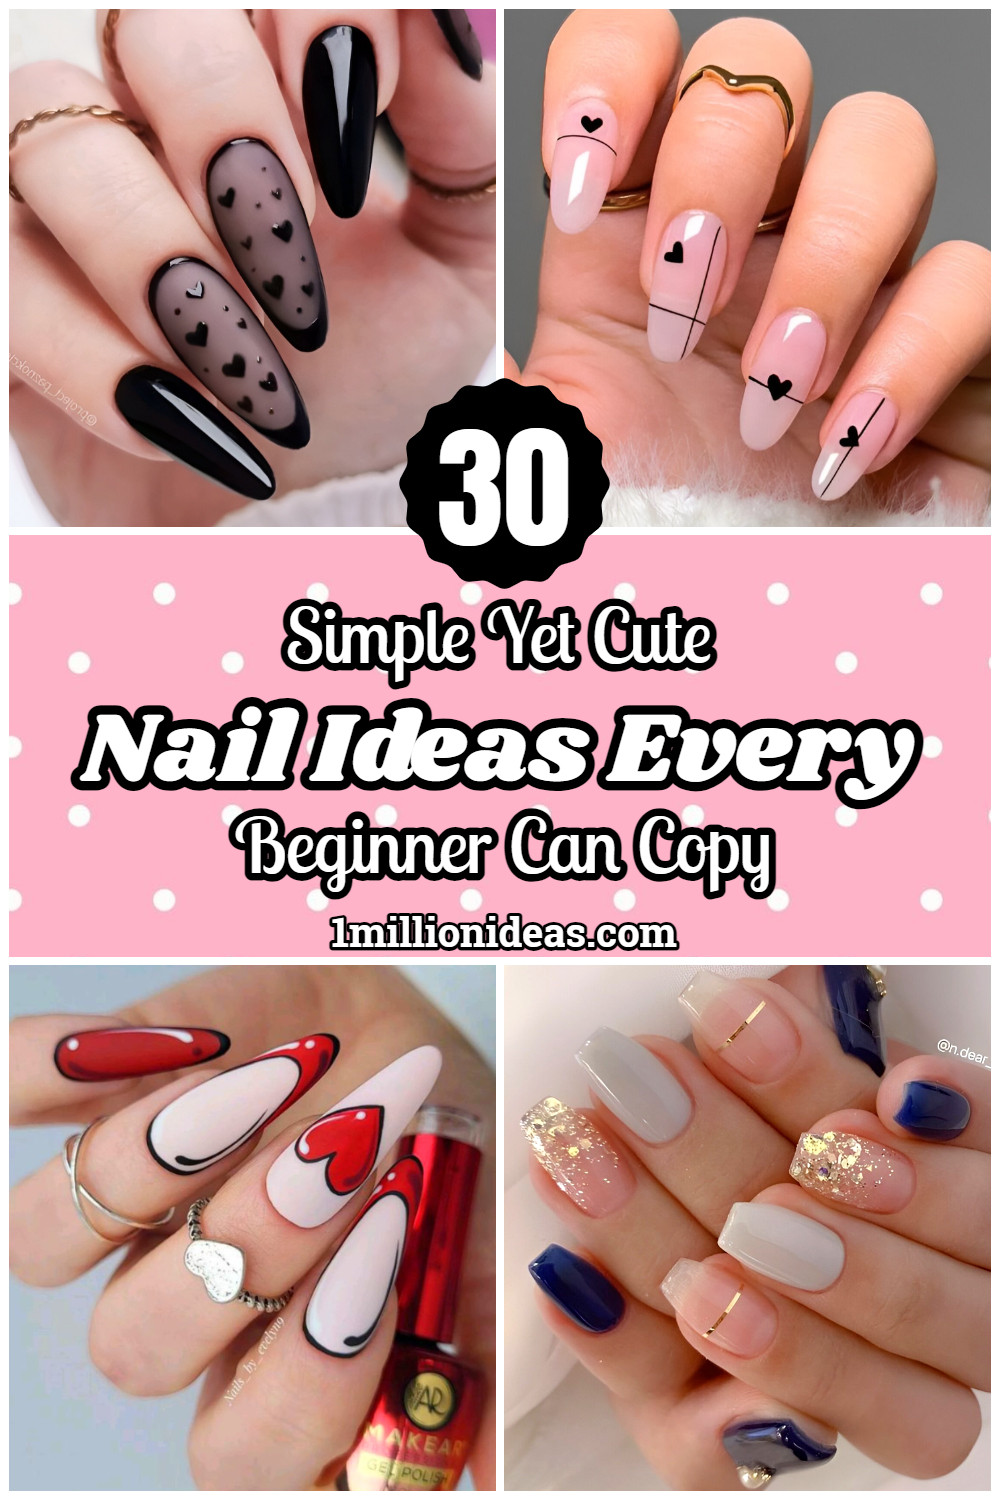 30 Simple Yet Cute Nail Ideas Every Beginner Can Copy - 191